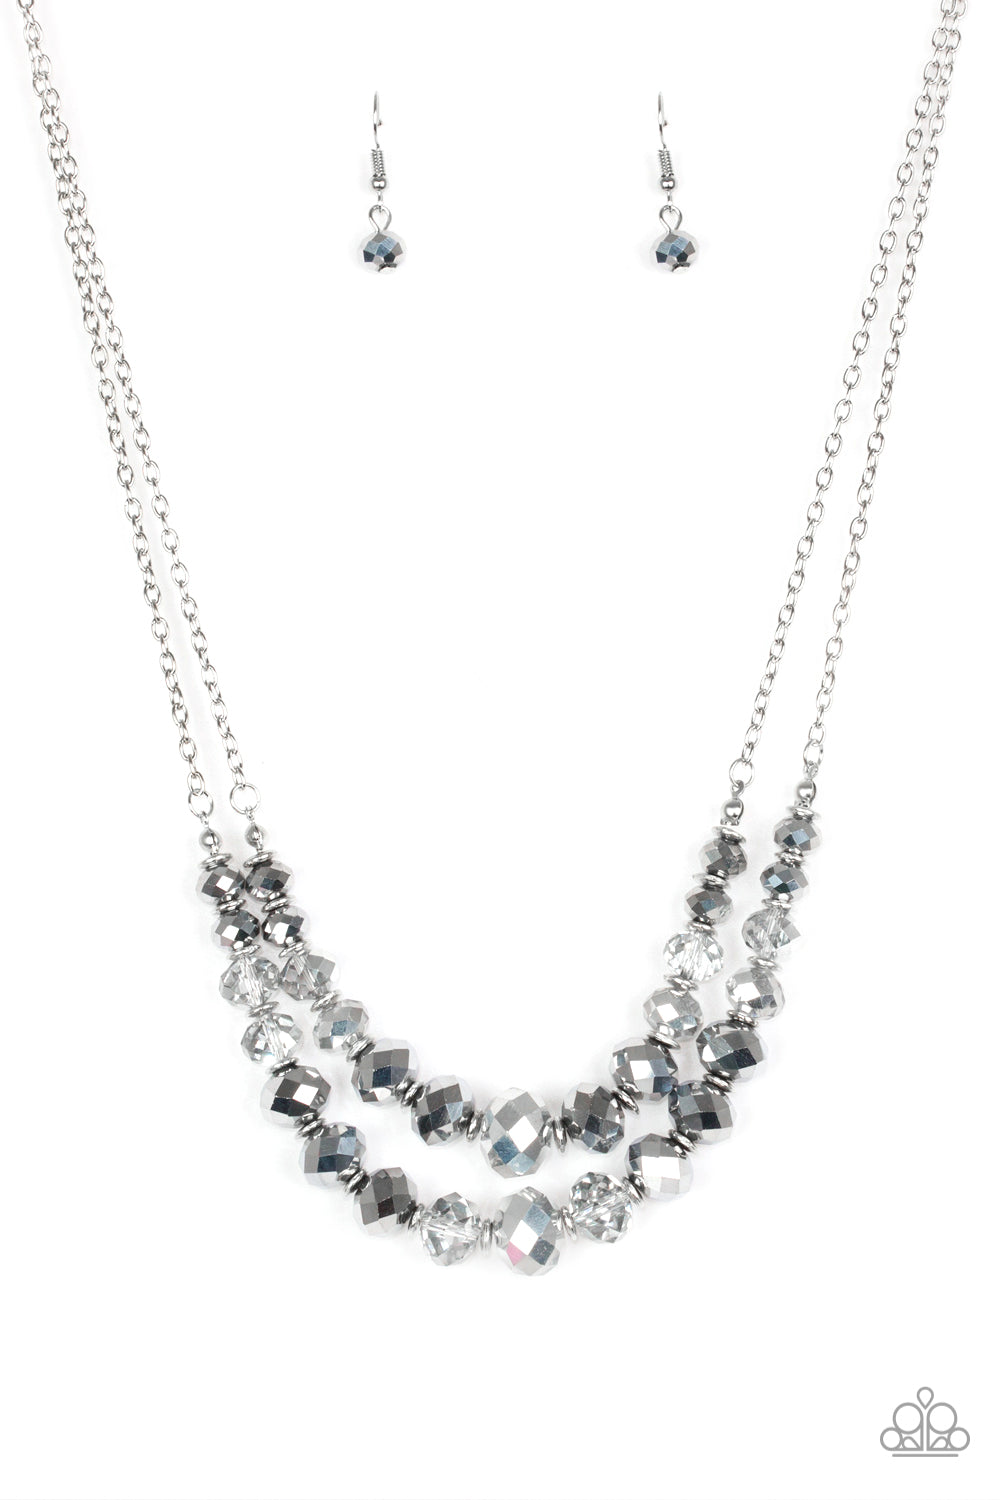 Strikingly Spellbinding Silver Paparazzi Necklace Cashmere Pink Jewels